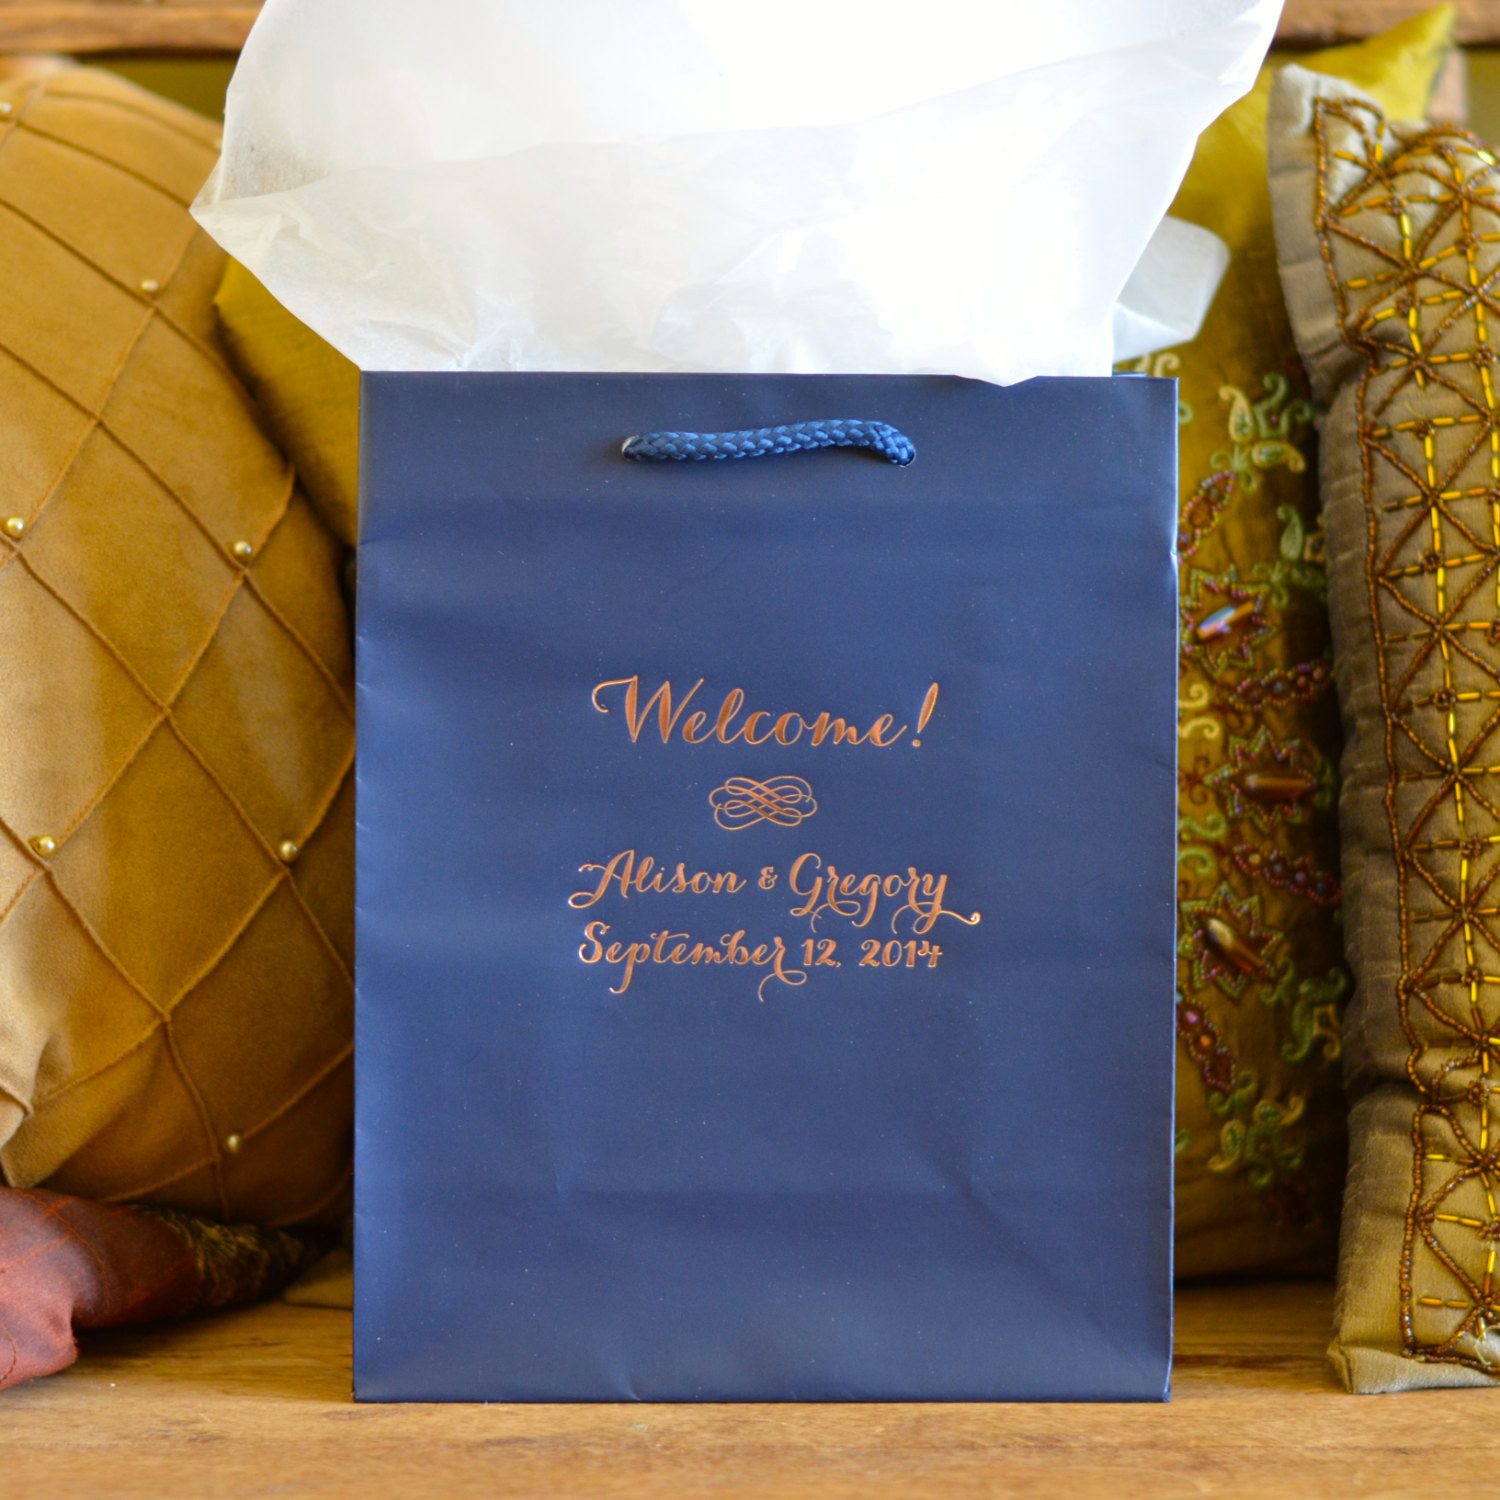 Wedding Hotel Gift Bags
 Personalized Hotel Wedding Wel e Bags for Out of Town Guests